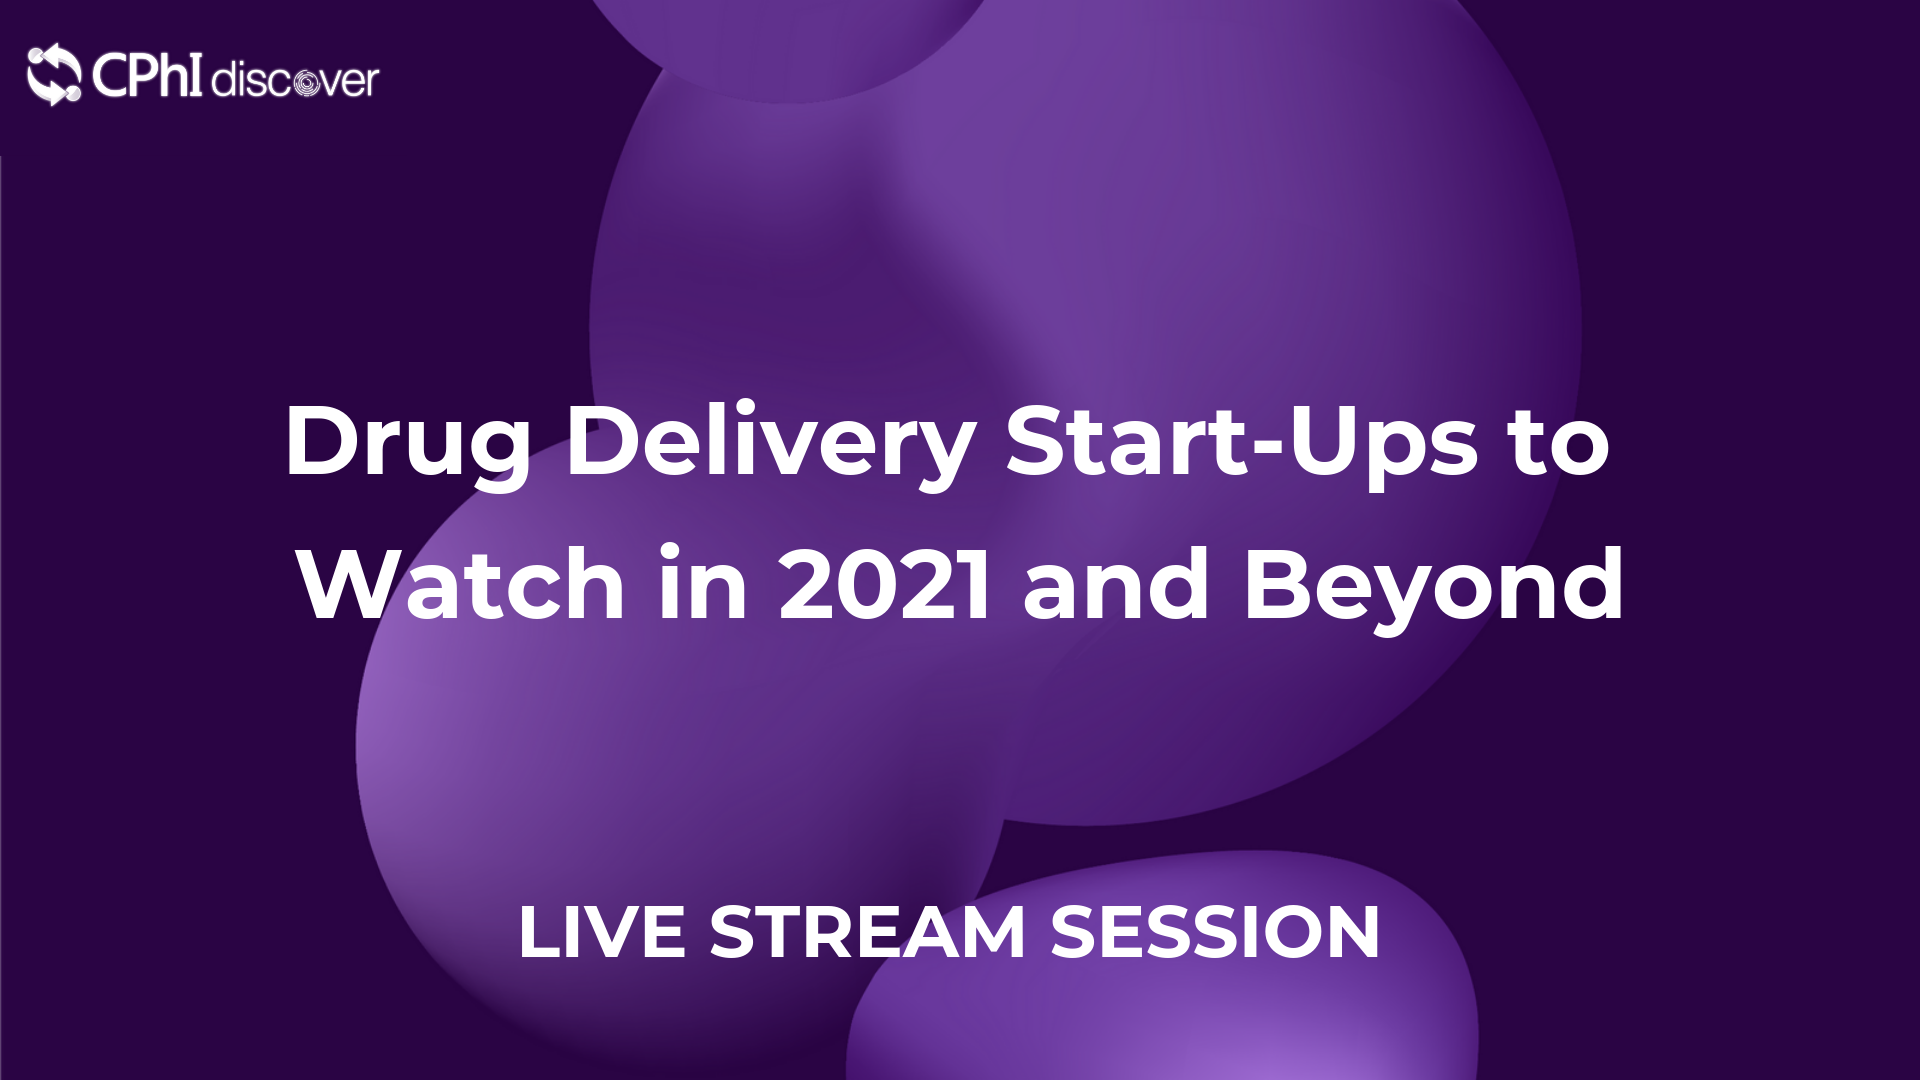 Drug Delivery Start-Ups to Watch in 2021 and Beyond